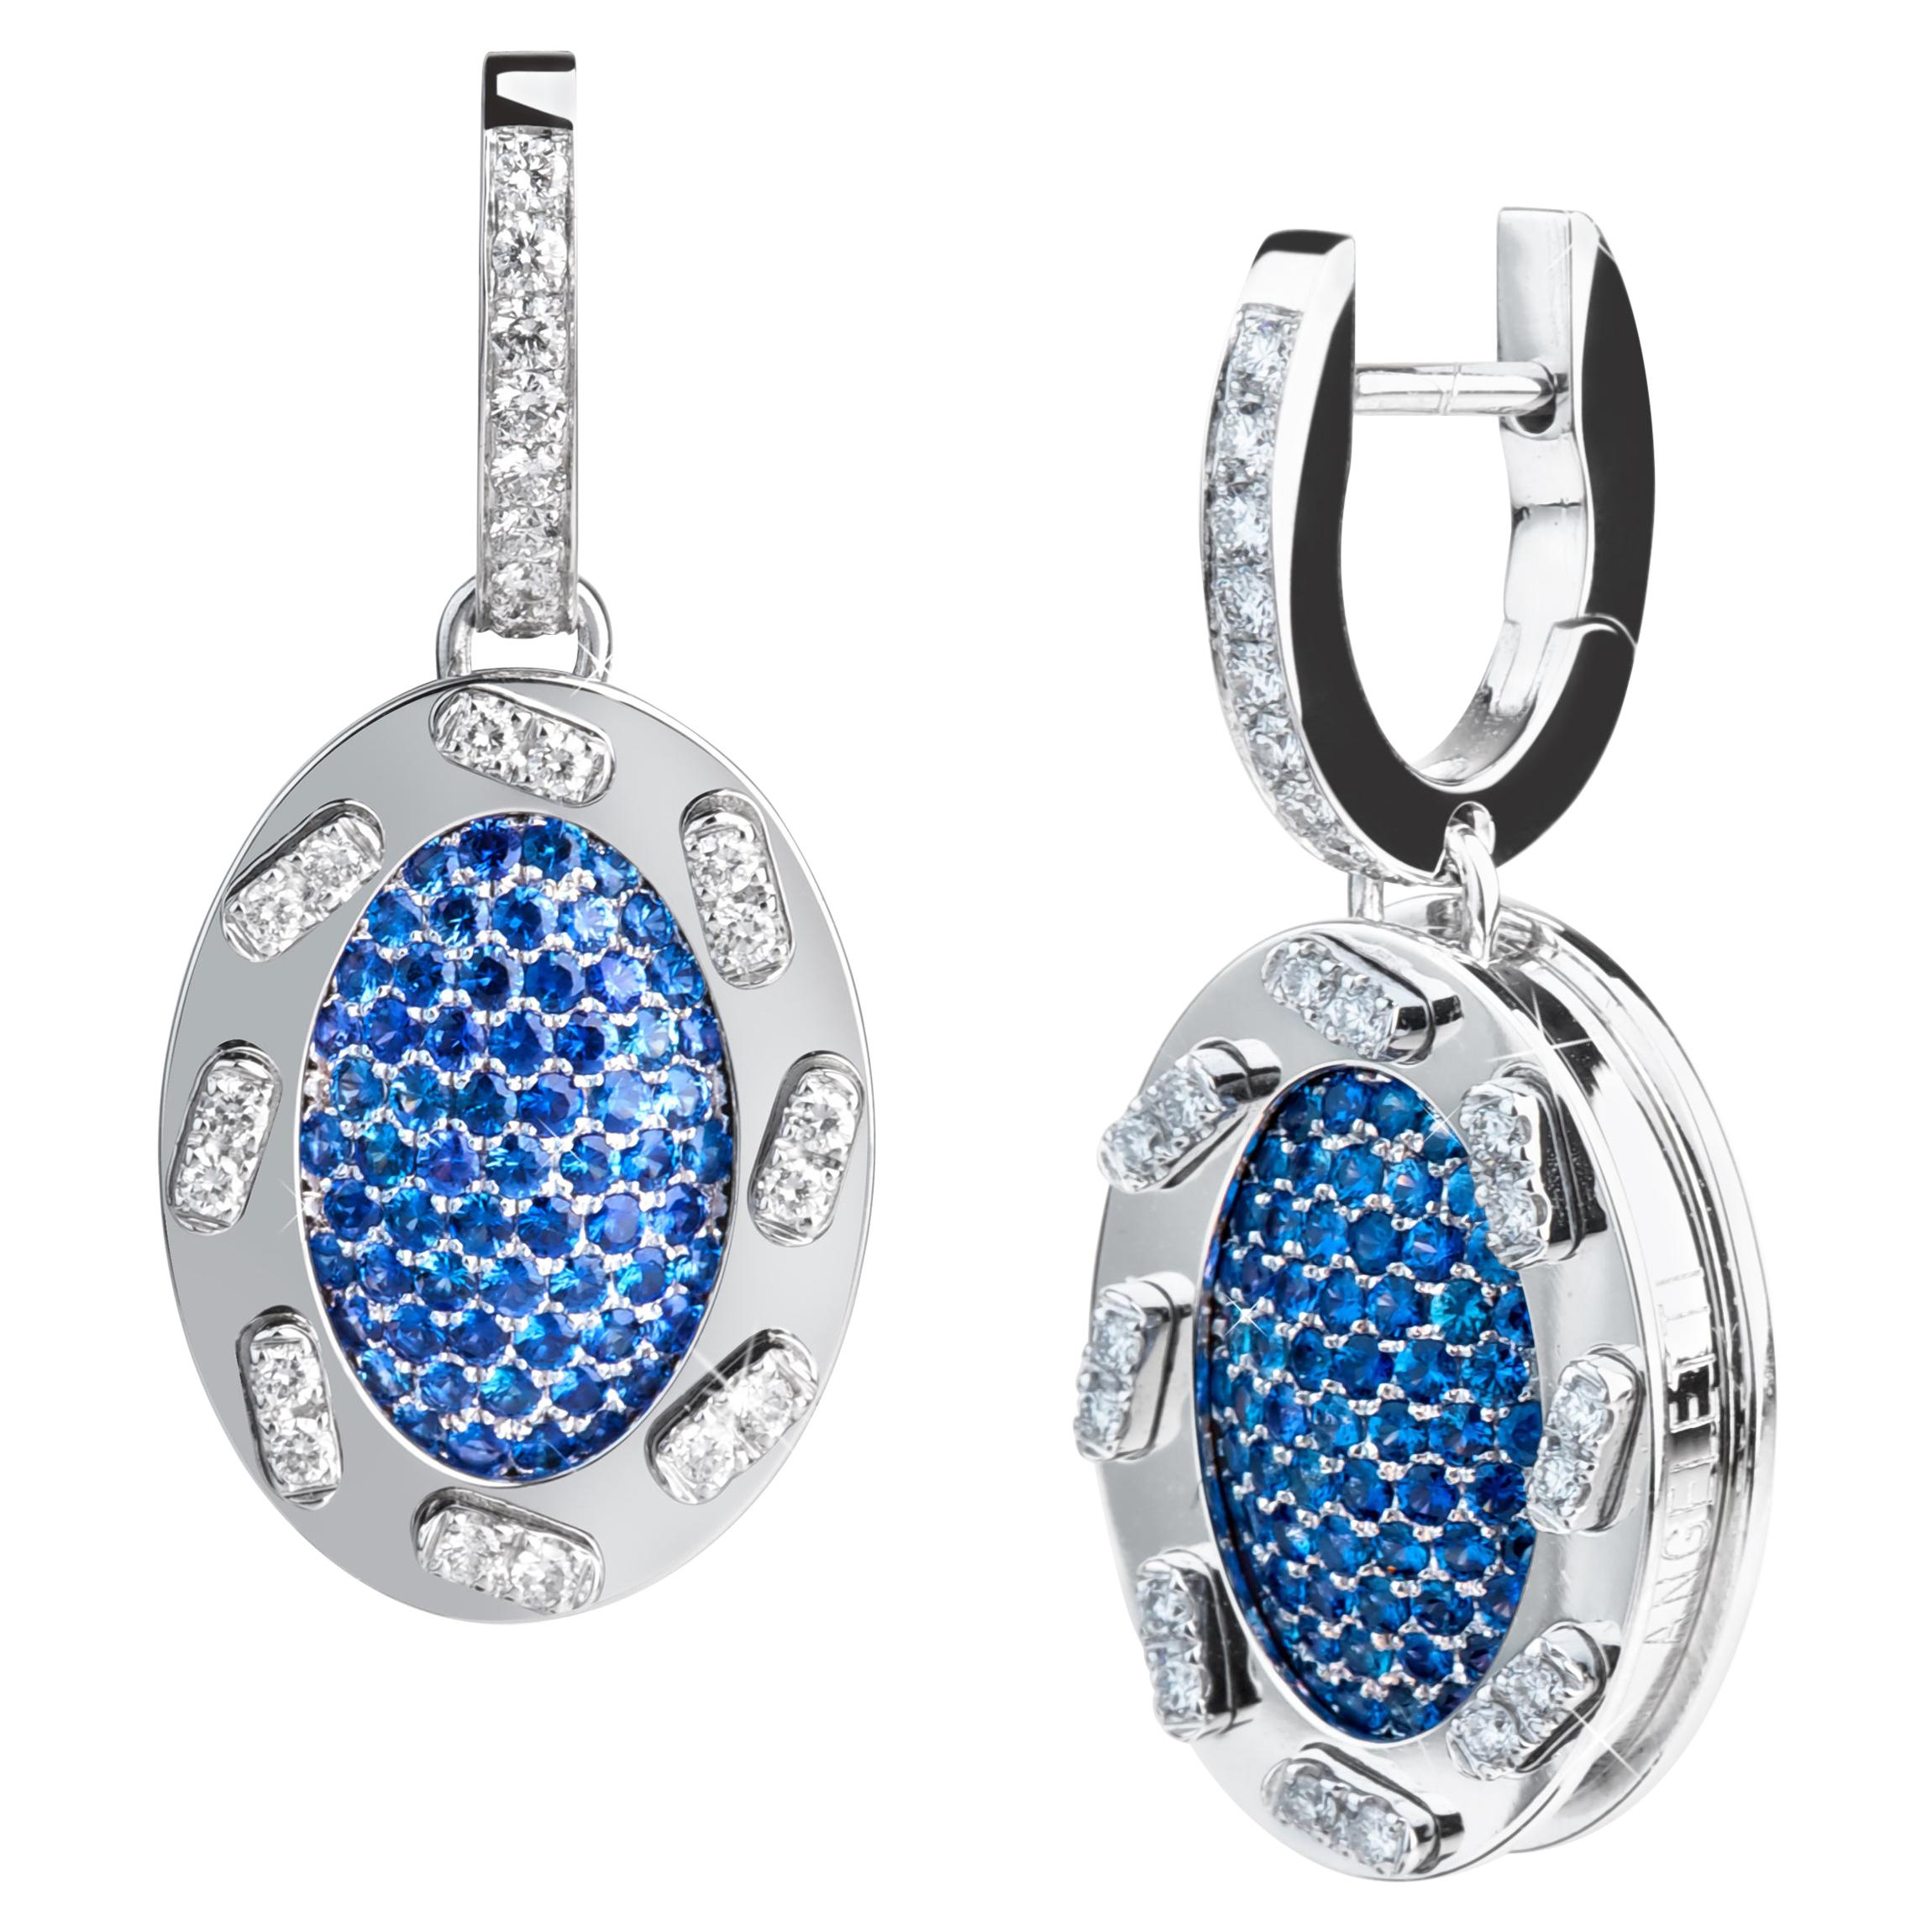 Earrings 18 Karat Gold Blue Sapphires, Diamonds from the Iconic Omles Collection For Sale